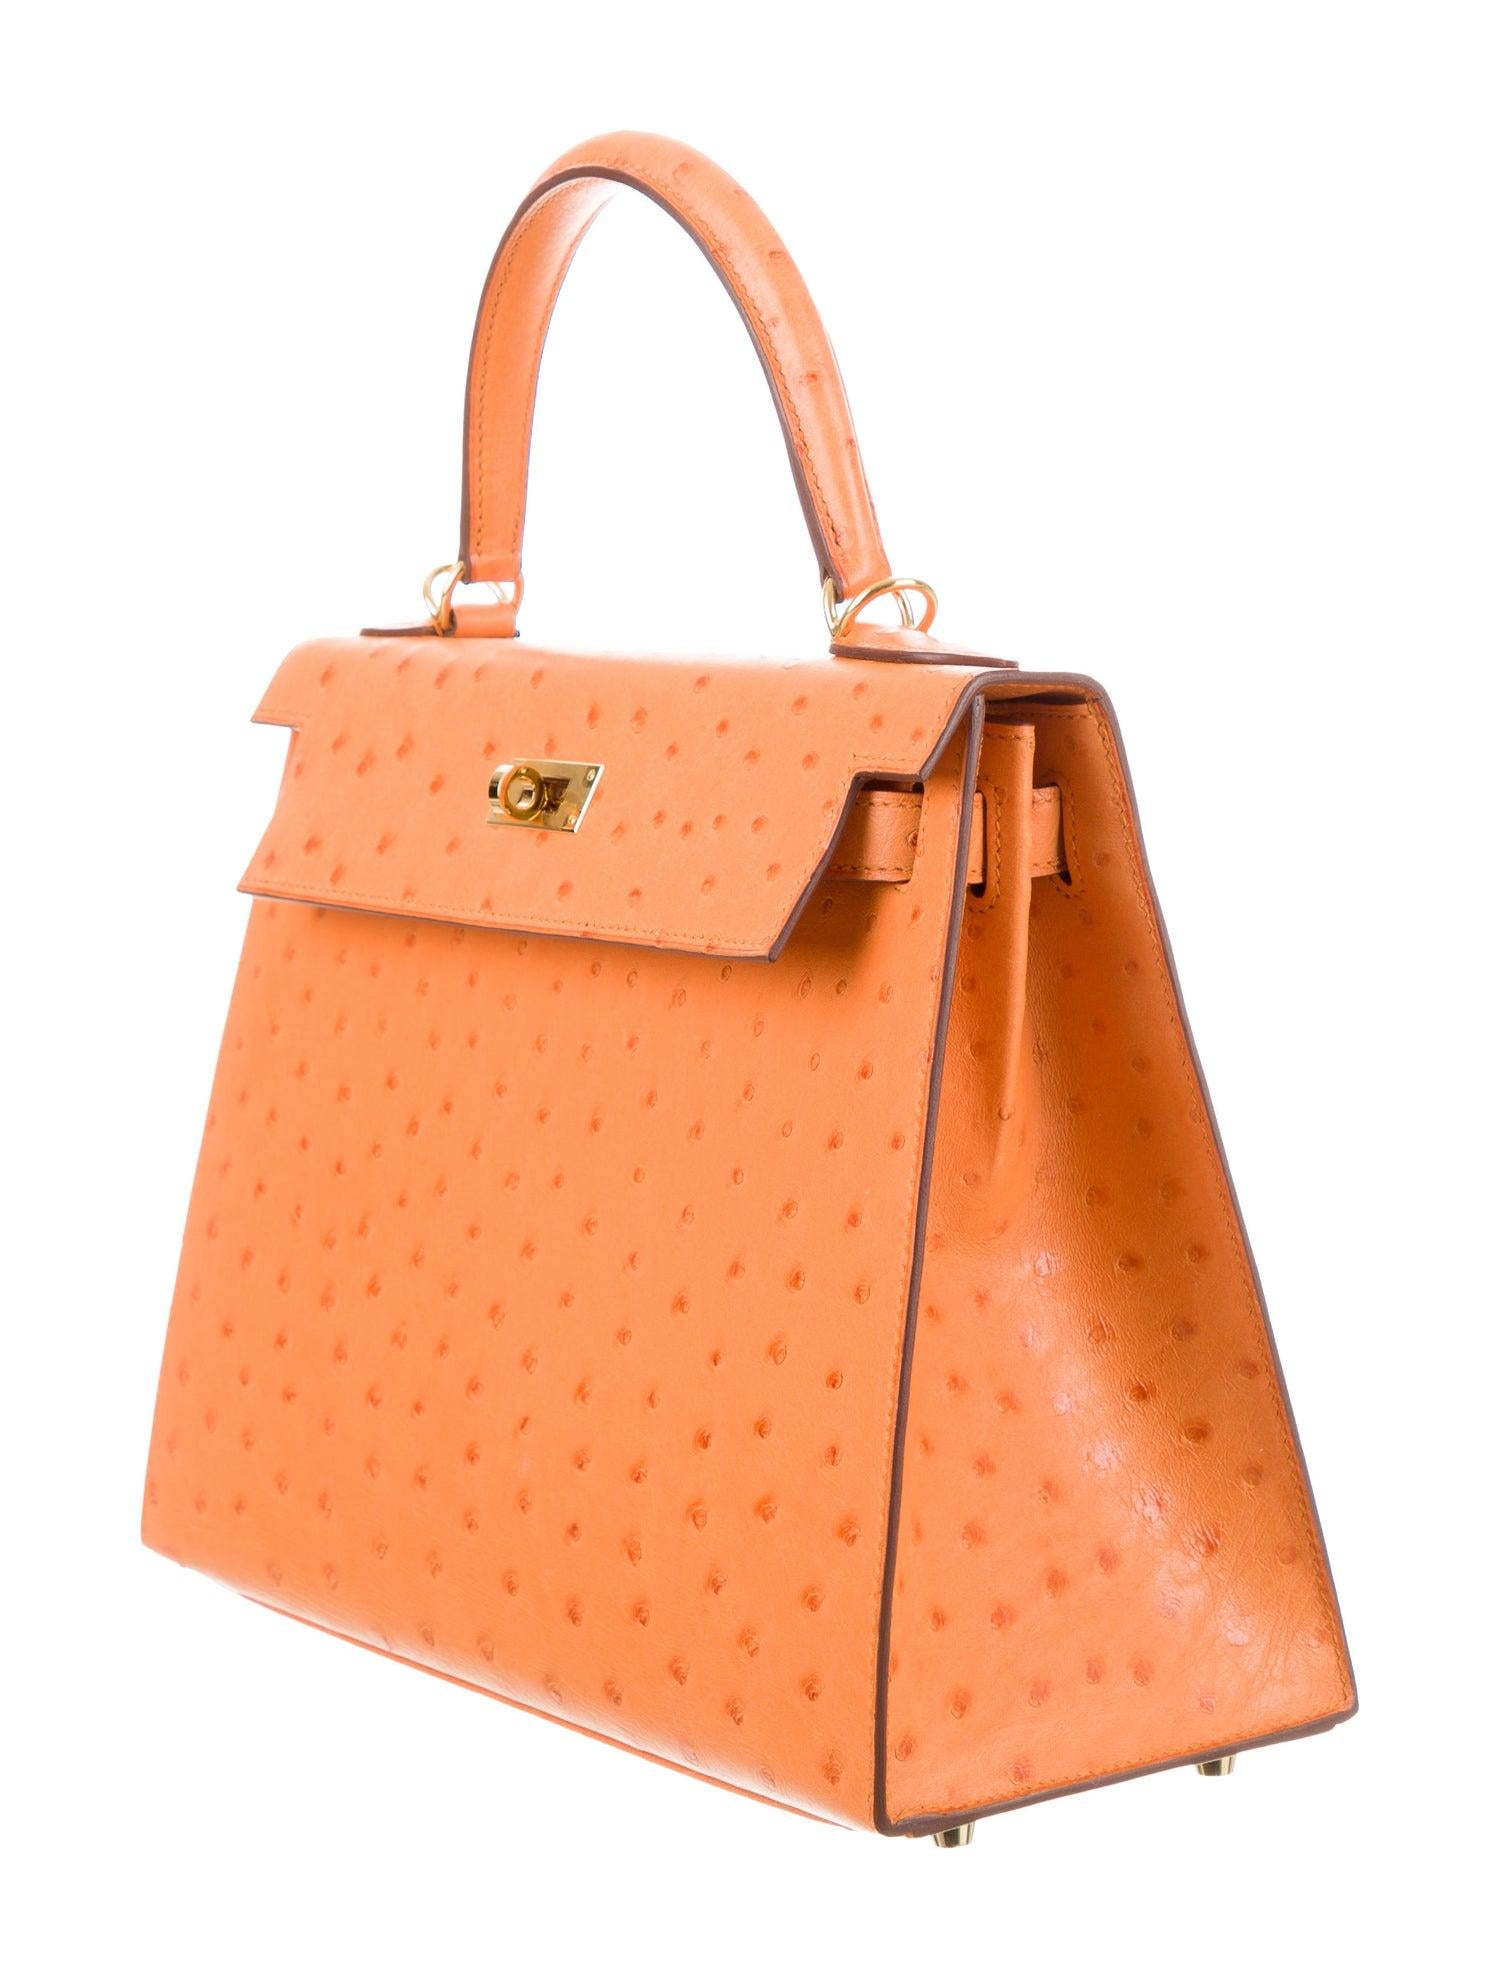 Hermes NEW Kelly 28 Blue Orange Ostrich Exotic Skin Top Handle Tote Shoulder Bag in Box

Ostrich
Gold tone hardware
Leather lining
Turn-lock closure
Made in France
Date code present (2019)
Top Handle drop 3.5